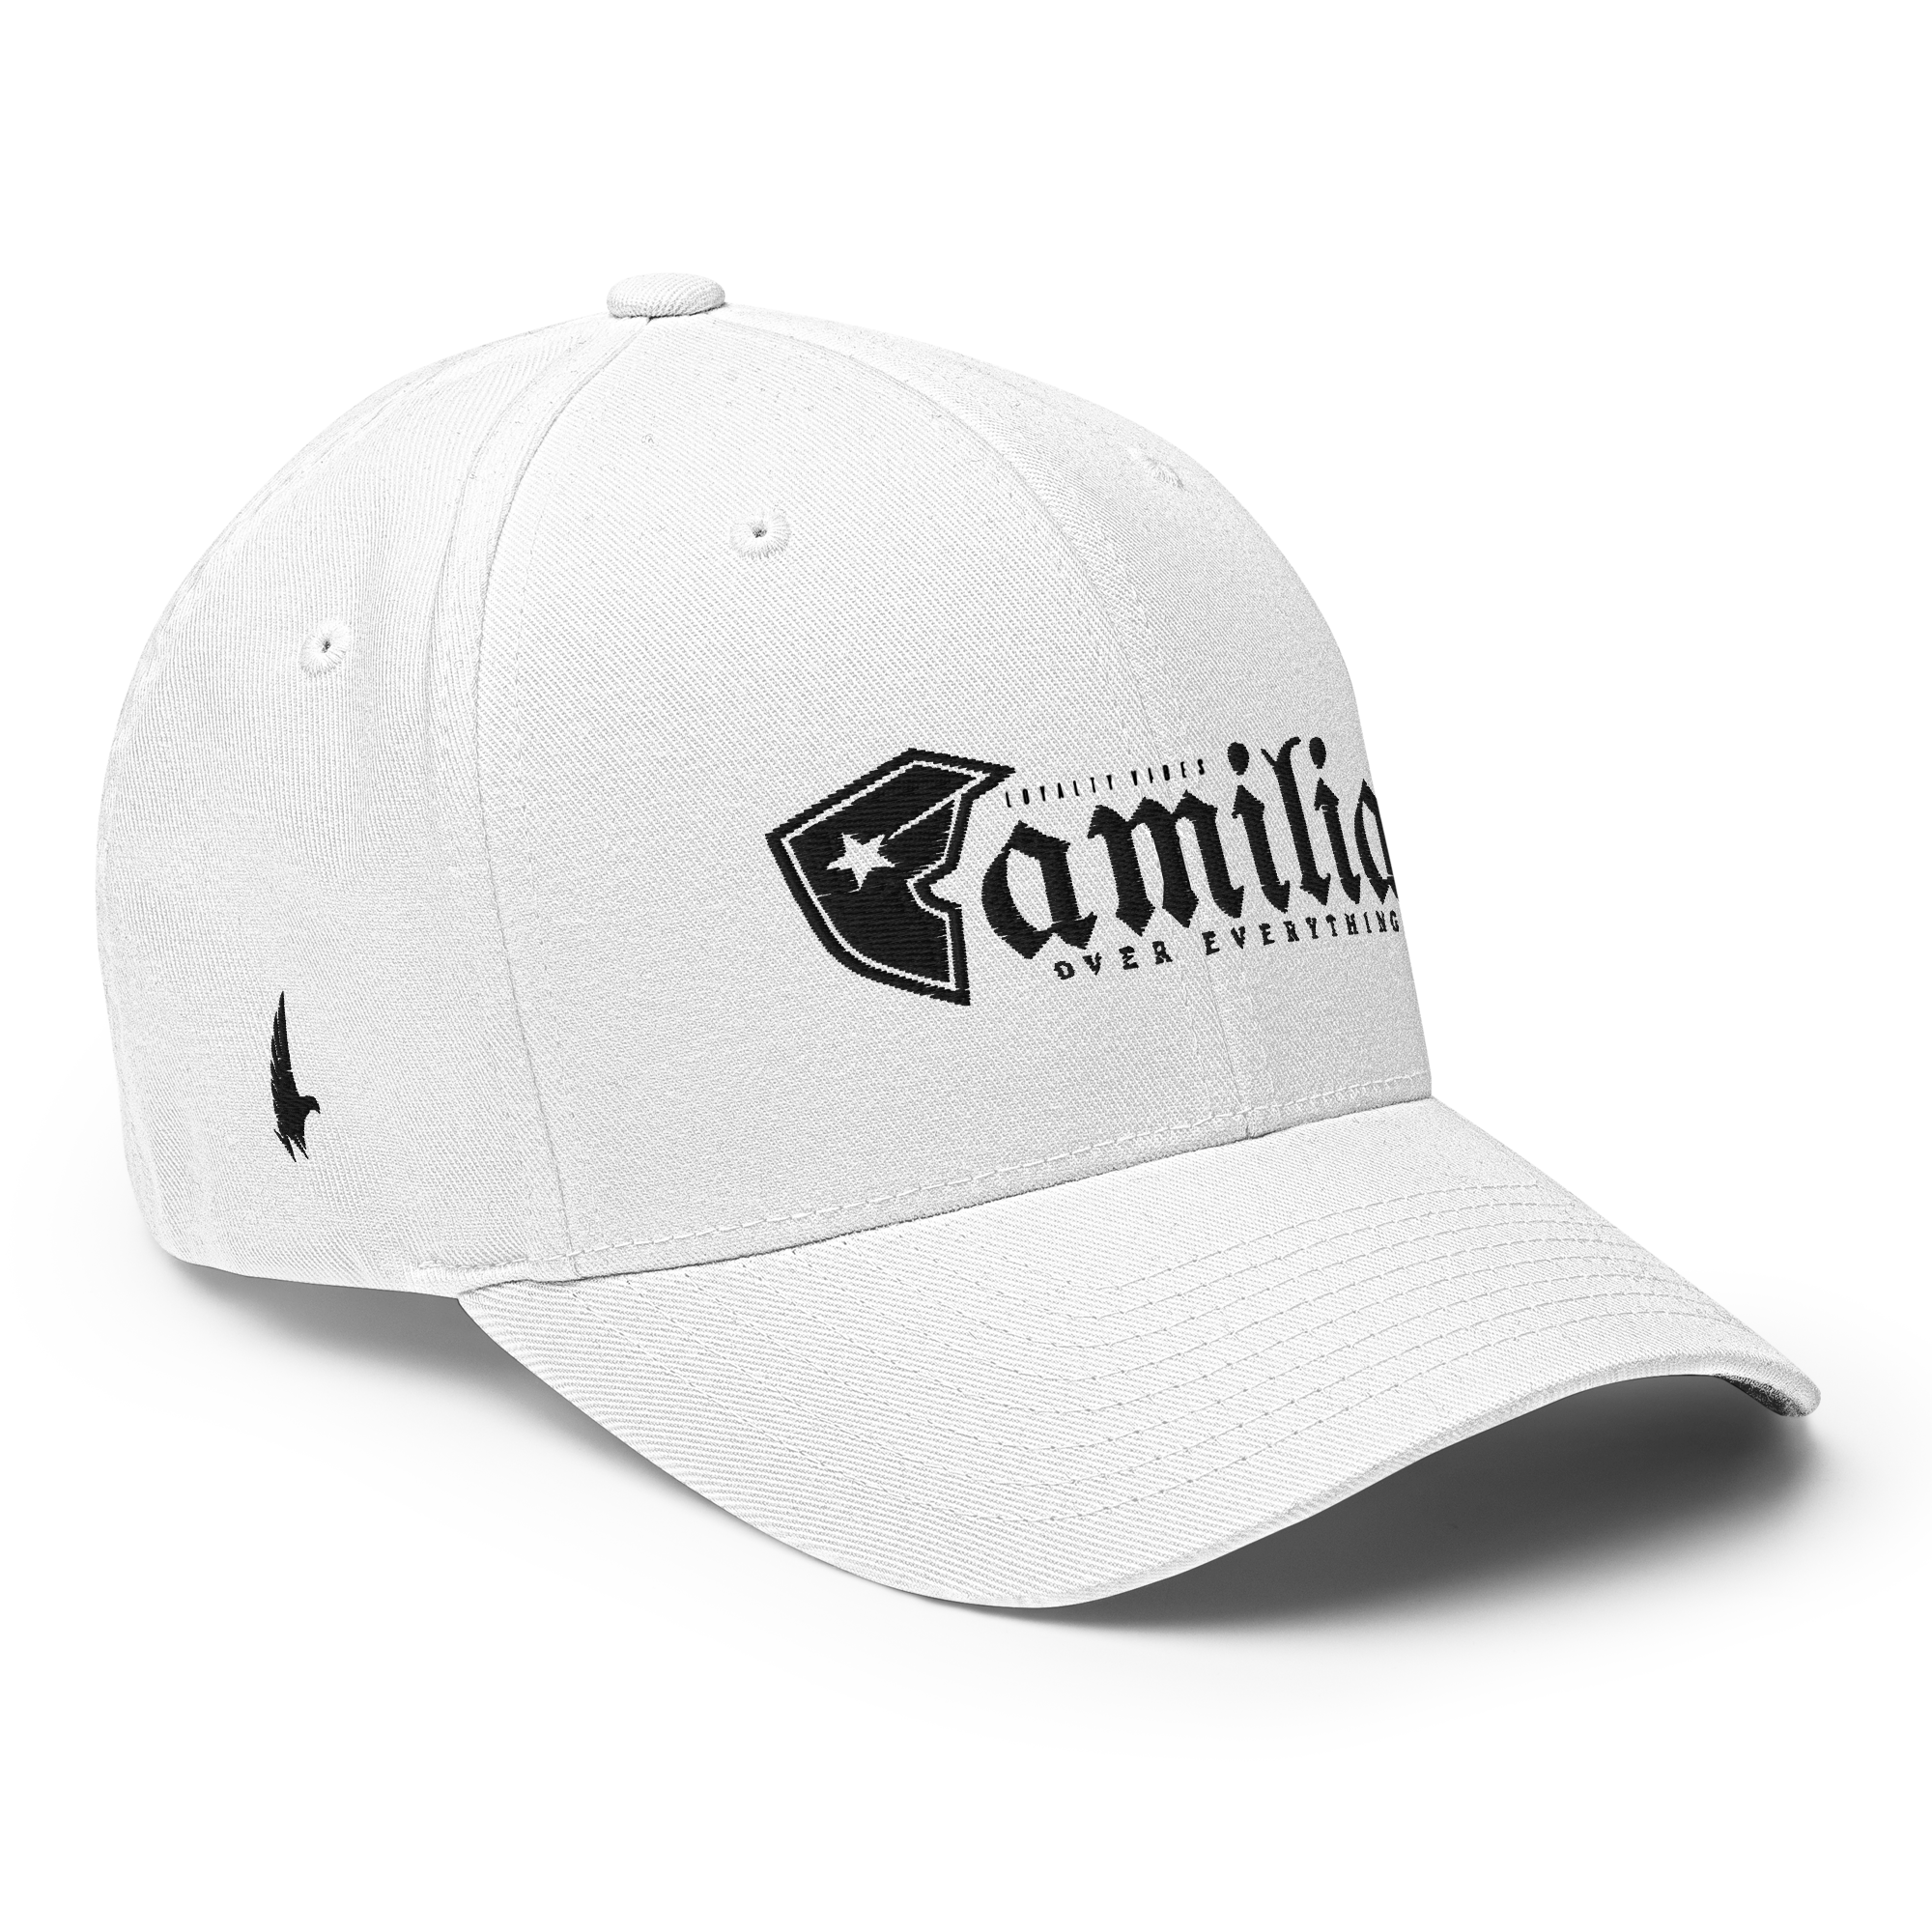 Familia Over Everything Fitted Hat White - Loyalty Vibes